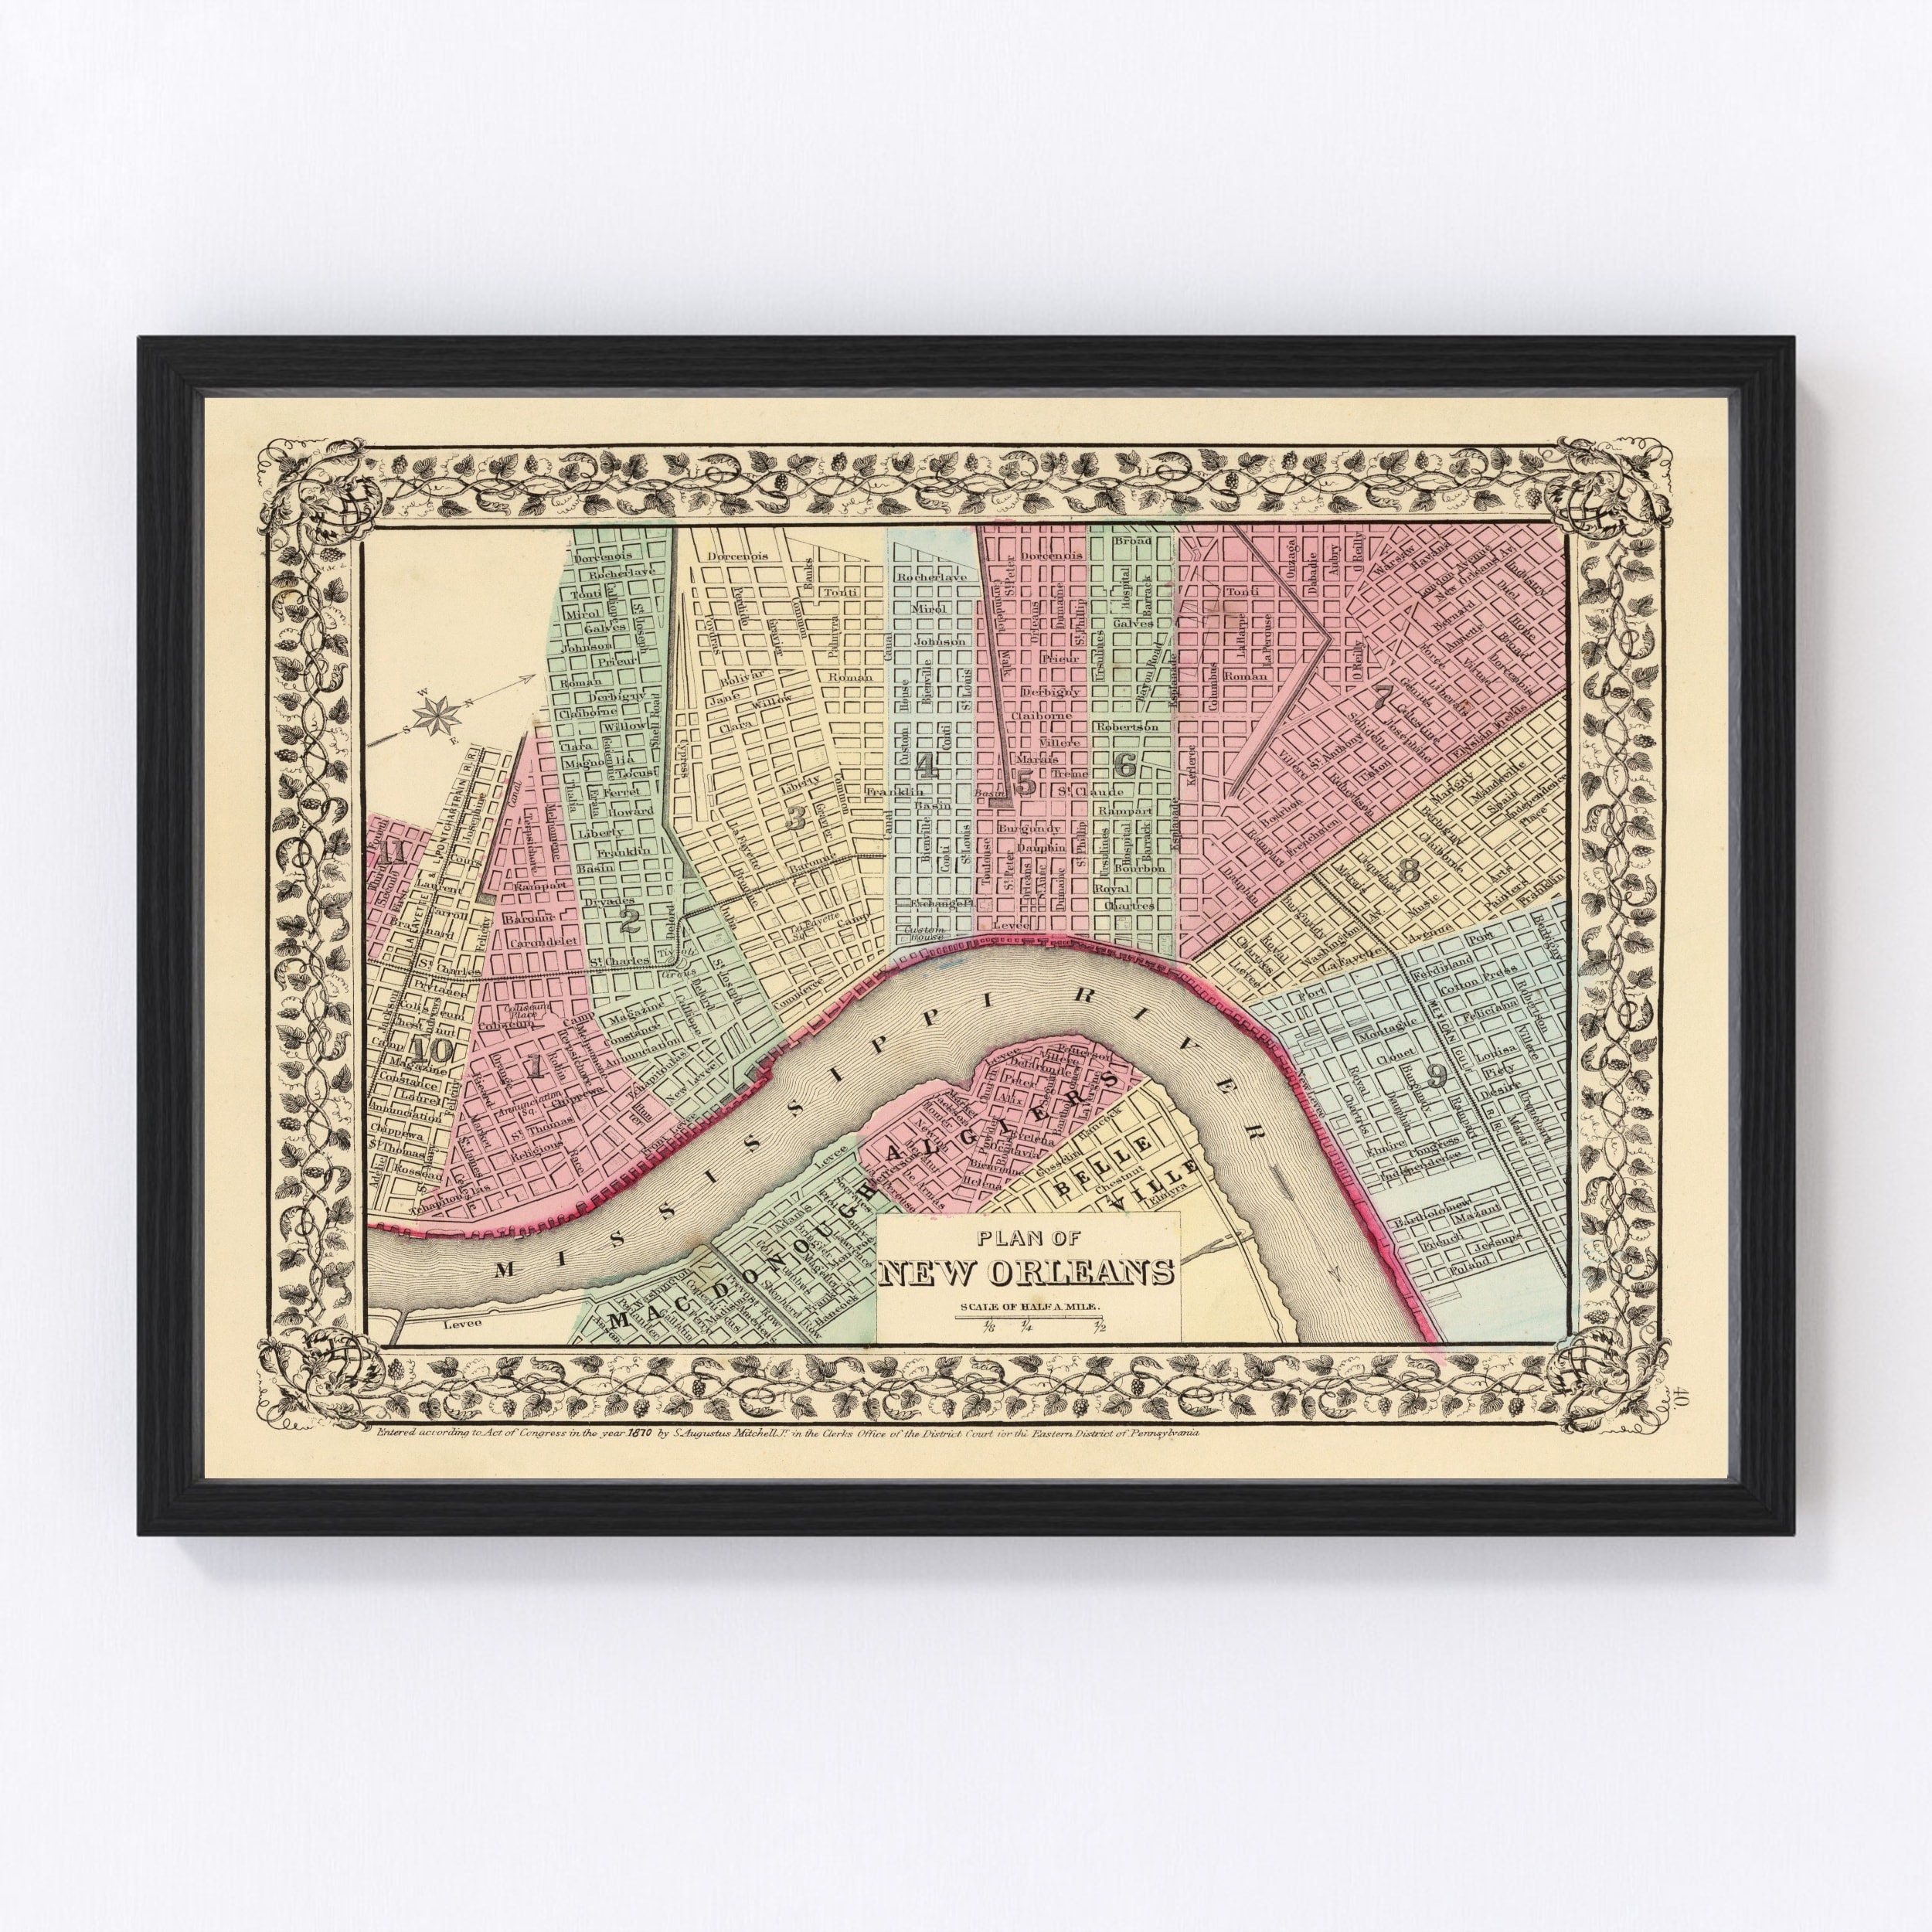 Tene New Orleans Map New Orleans Poster New Orleans Wall Art New Orleans Print New Orleans Wall Map New Orleans City Map 